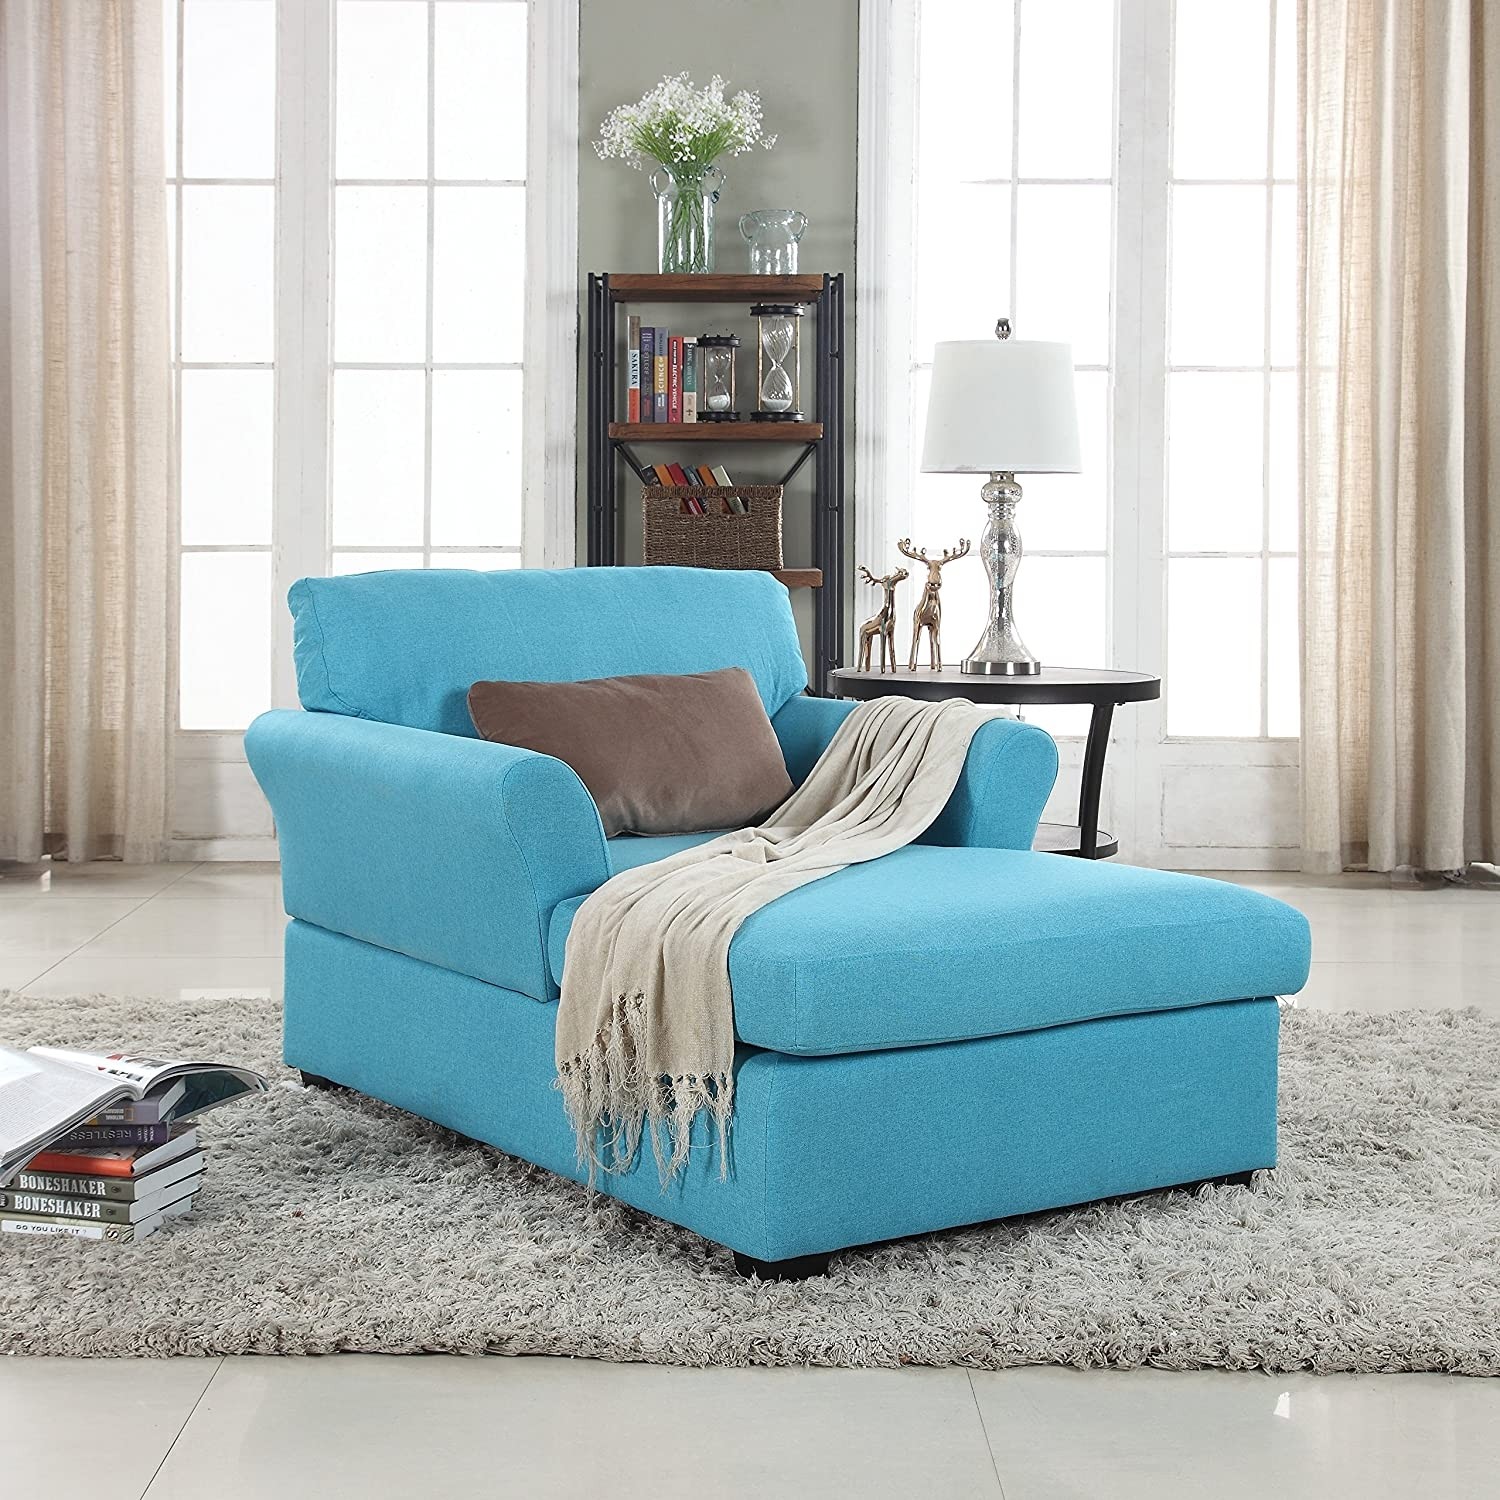 Oversized chaise lounge chair indoor modern living bedroom 2